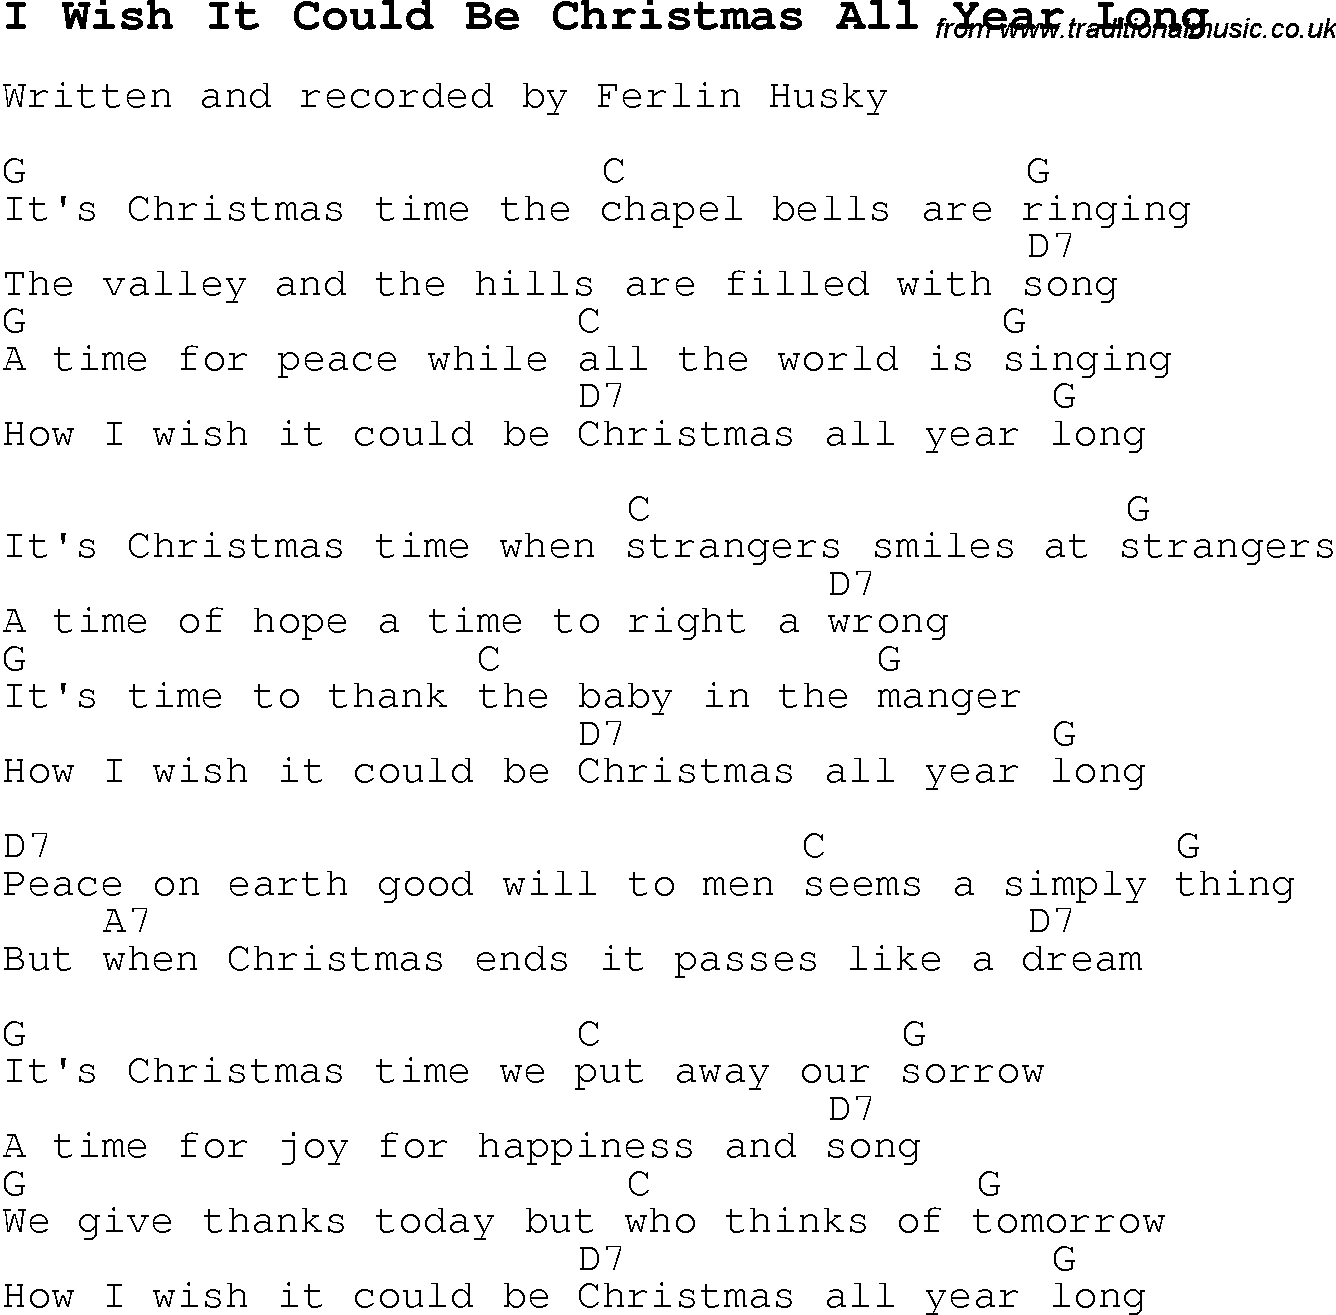 Christmas Songs and Carols, lyrics with chords for guitar banjo for I Wish It Could Be Christmas All Year Long